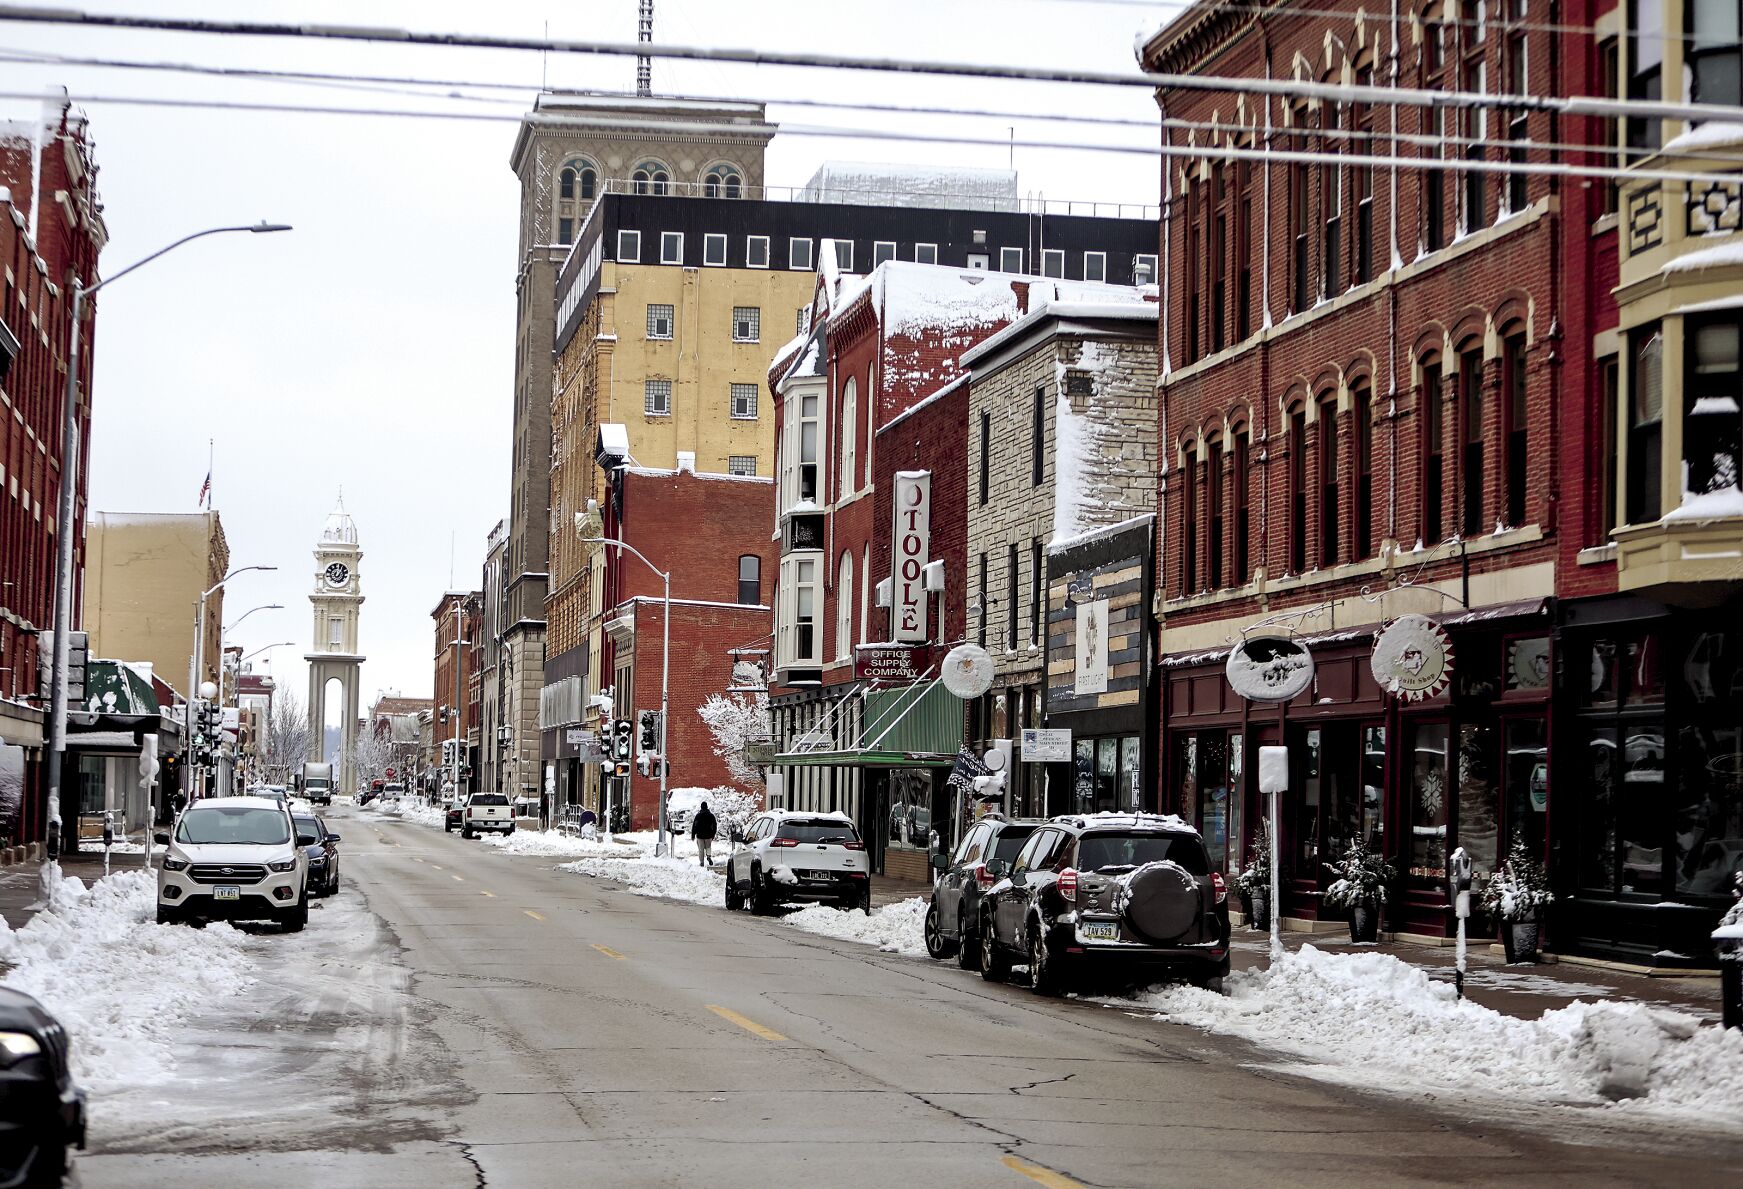 Snow fills parts of Main Street in Dubuque last week. As the new year finds its footing, there are trends and changes that local experts say should be on business owners’ radar.    PHOTO CREDIT: Dave Kettering
Telegraph Herald